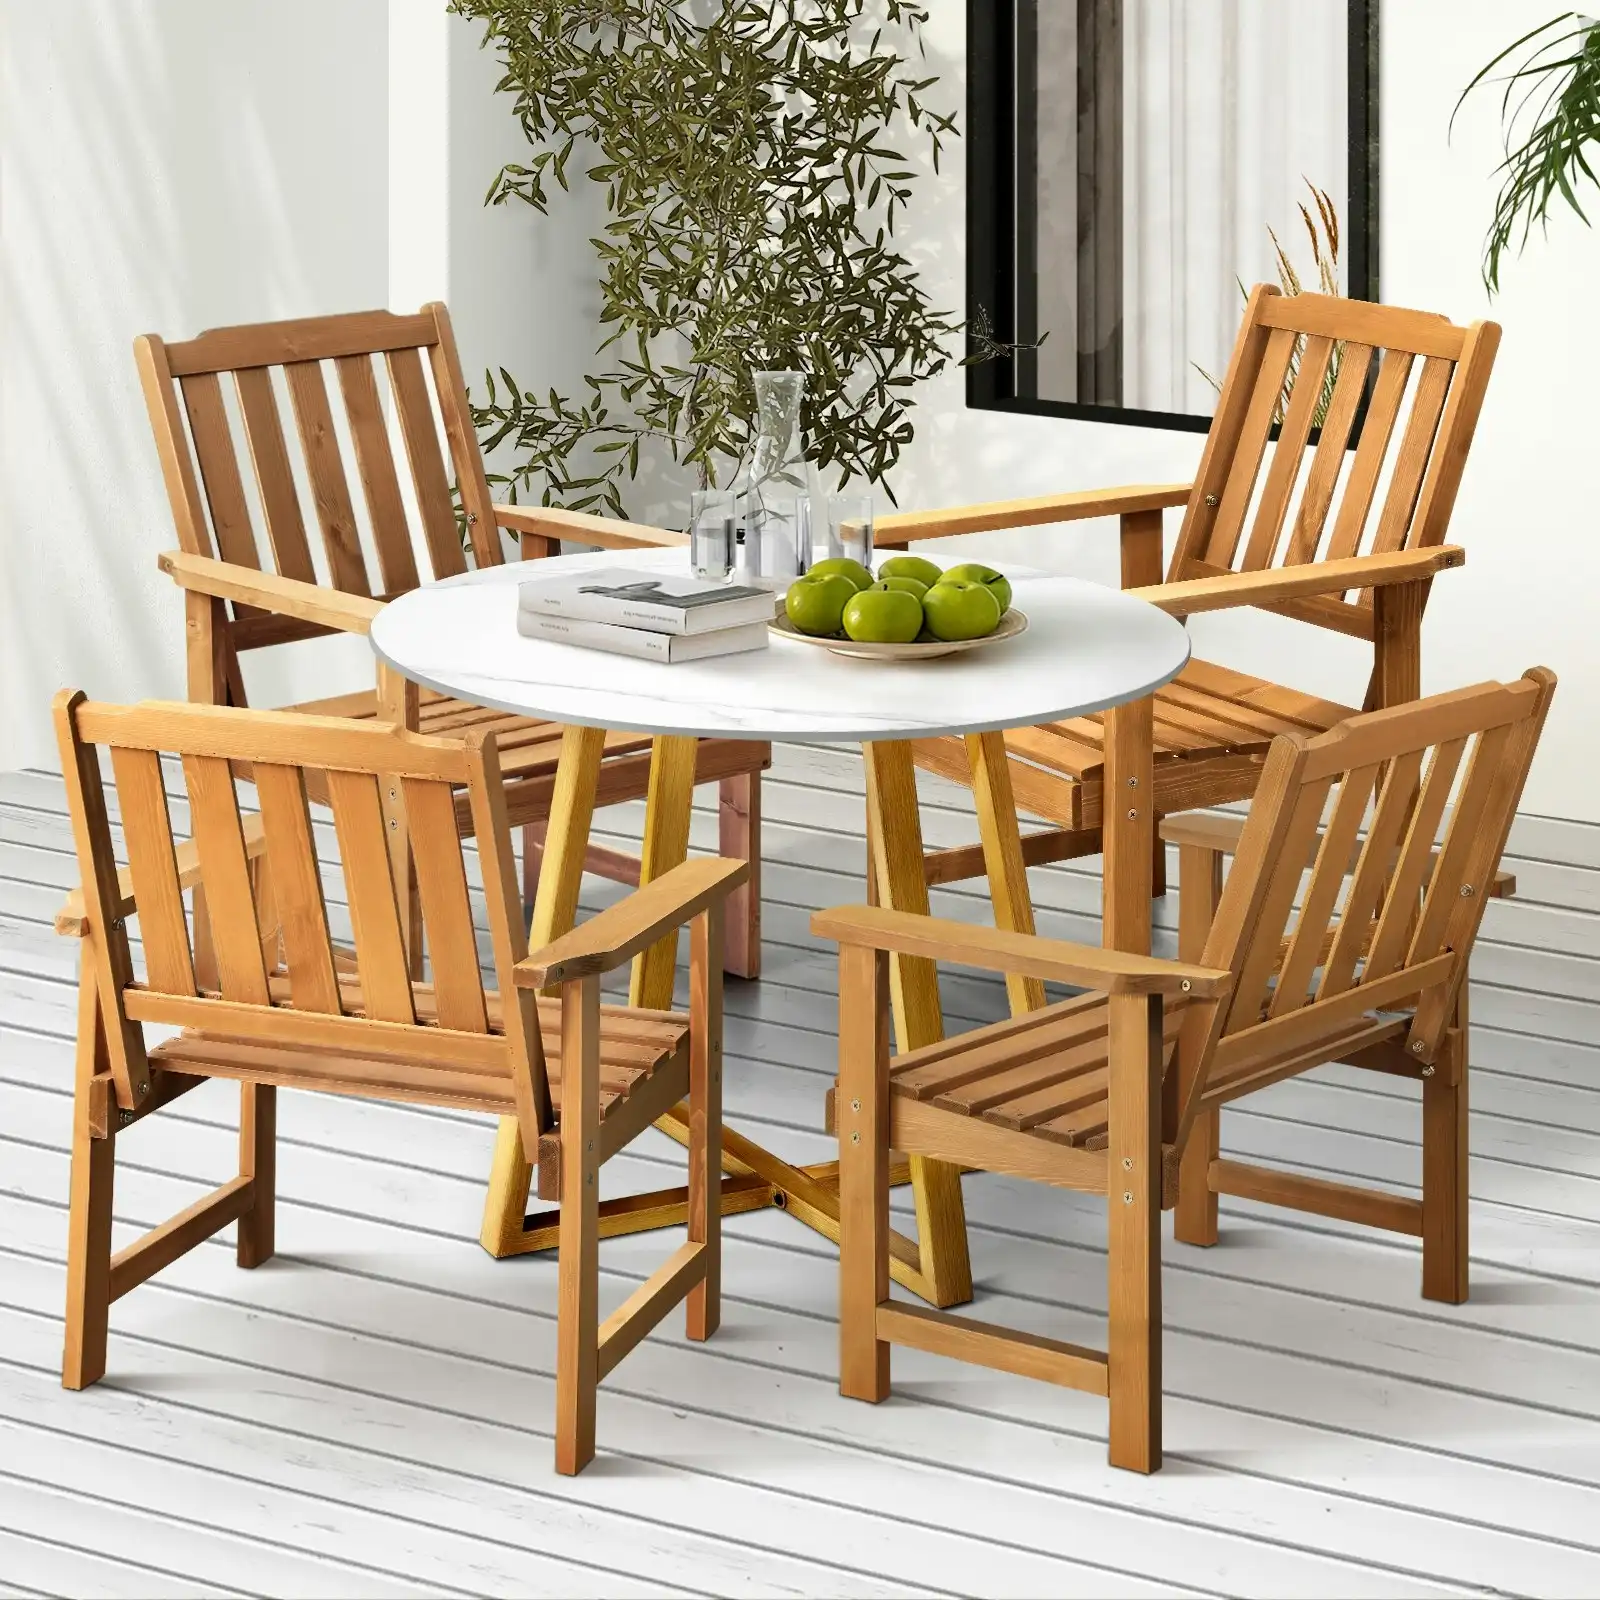 Livsip Outdoor Patio Set Solid Wood Chair and Table 5PC Furniture Dining Setting